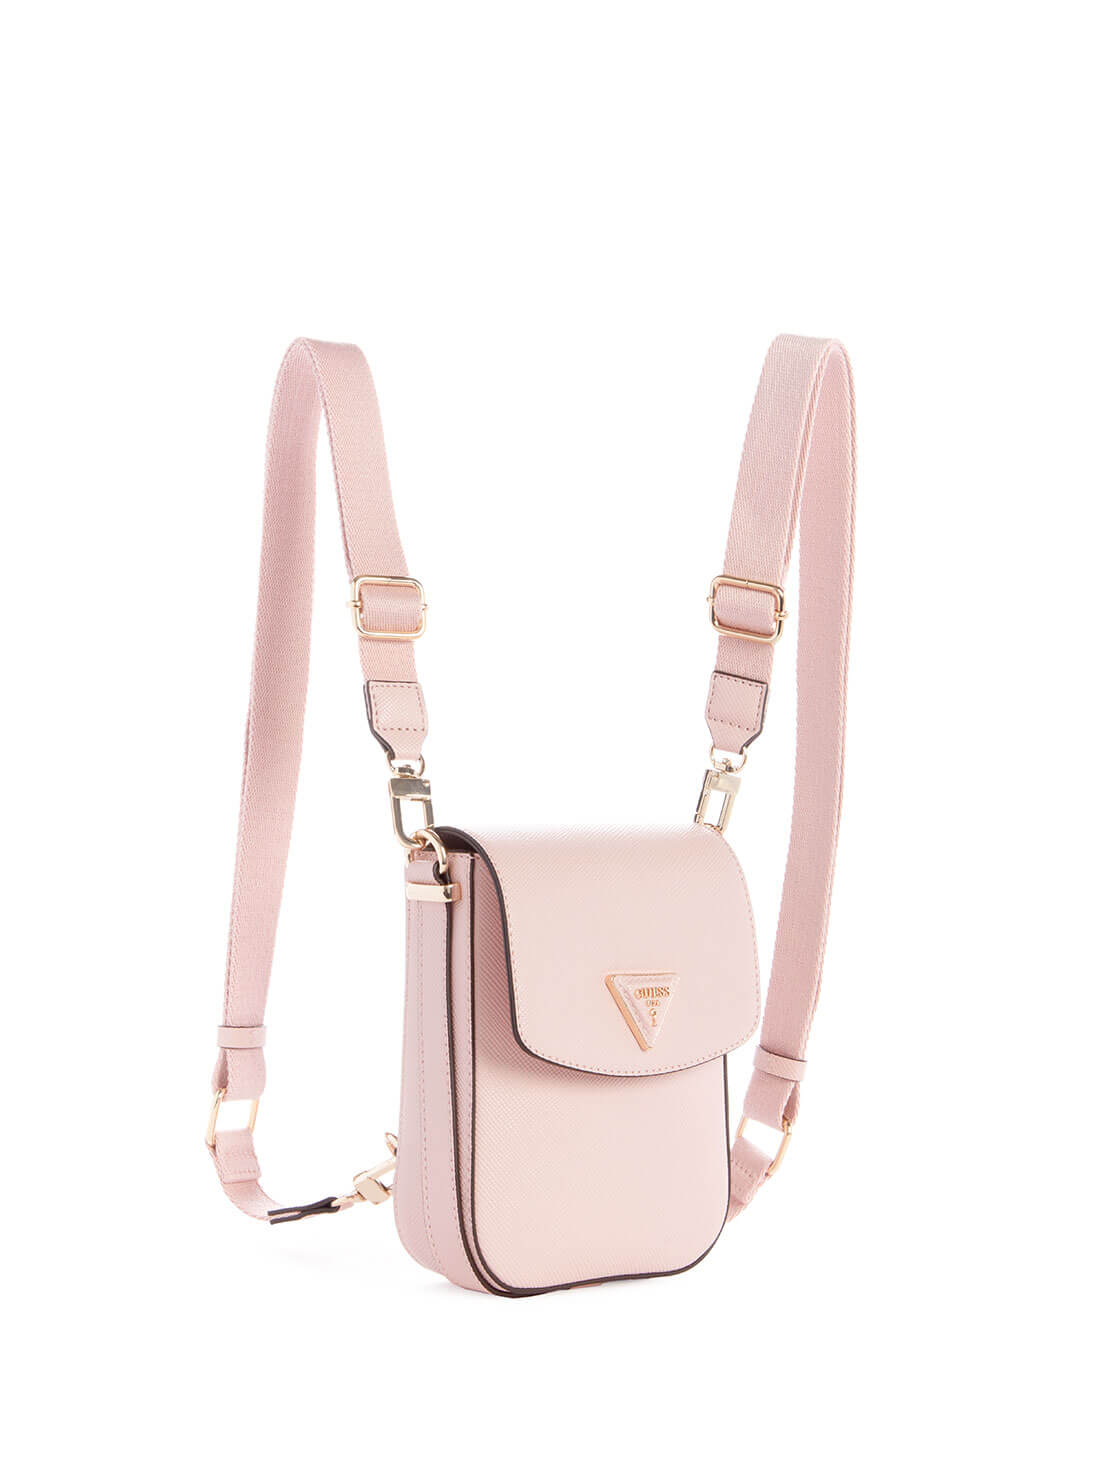 Women's Blush Pink Brynlee Mini Convertible Backpack front view alt